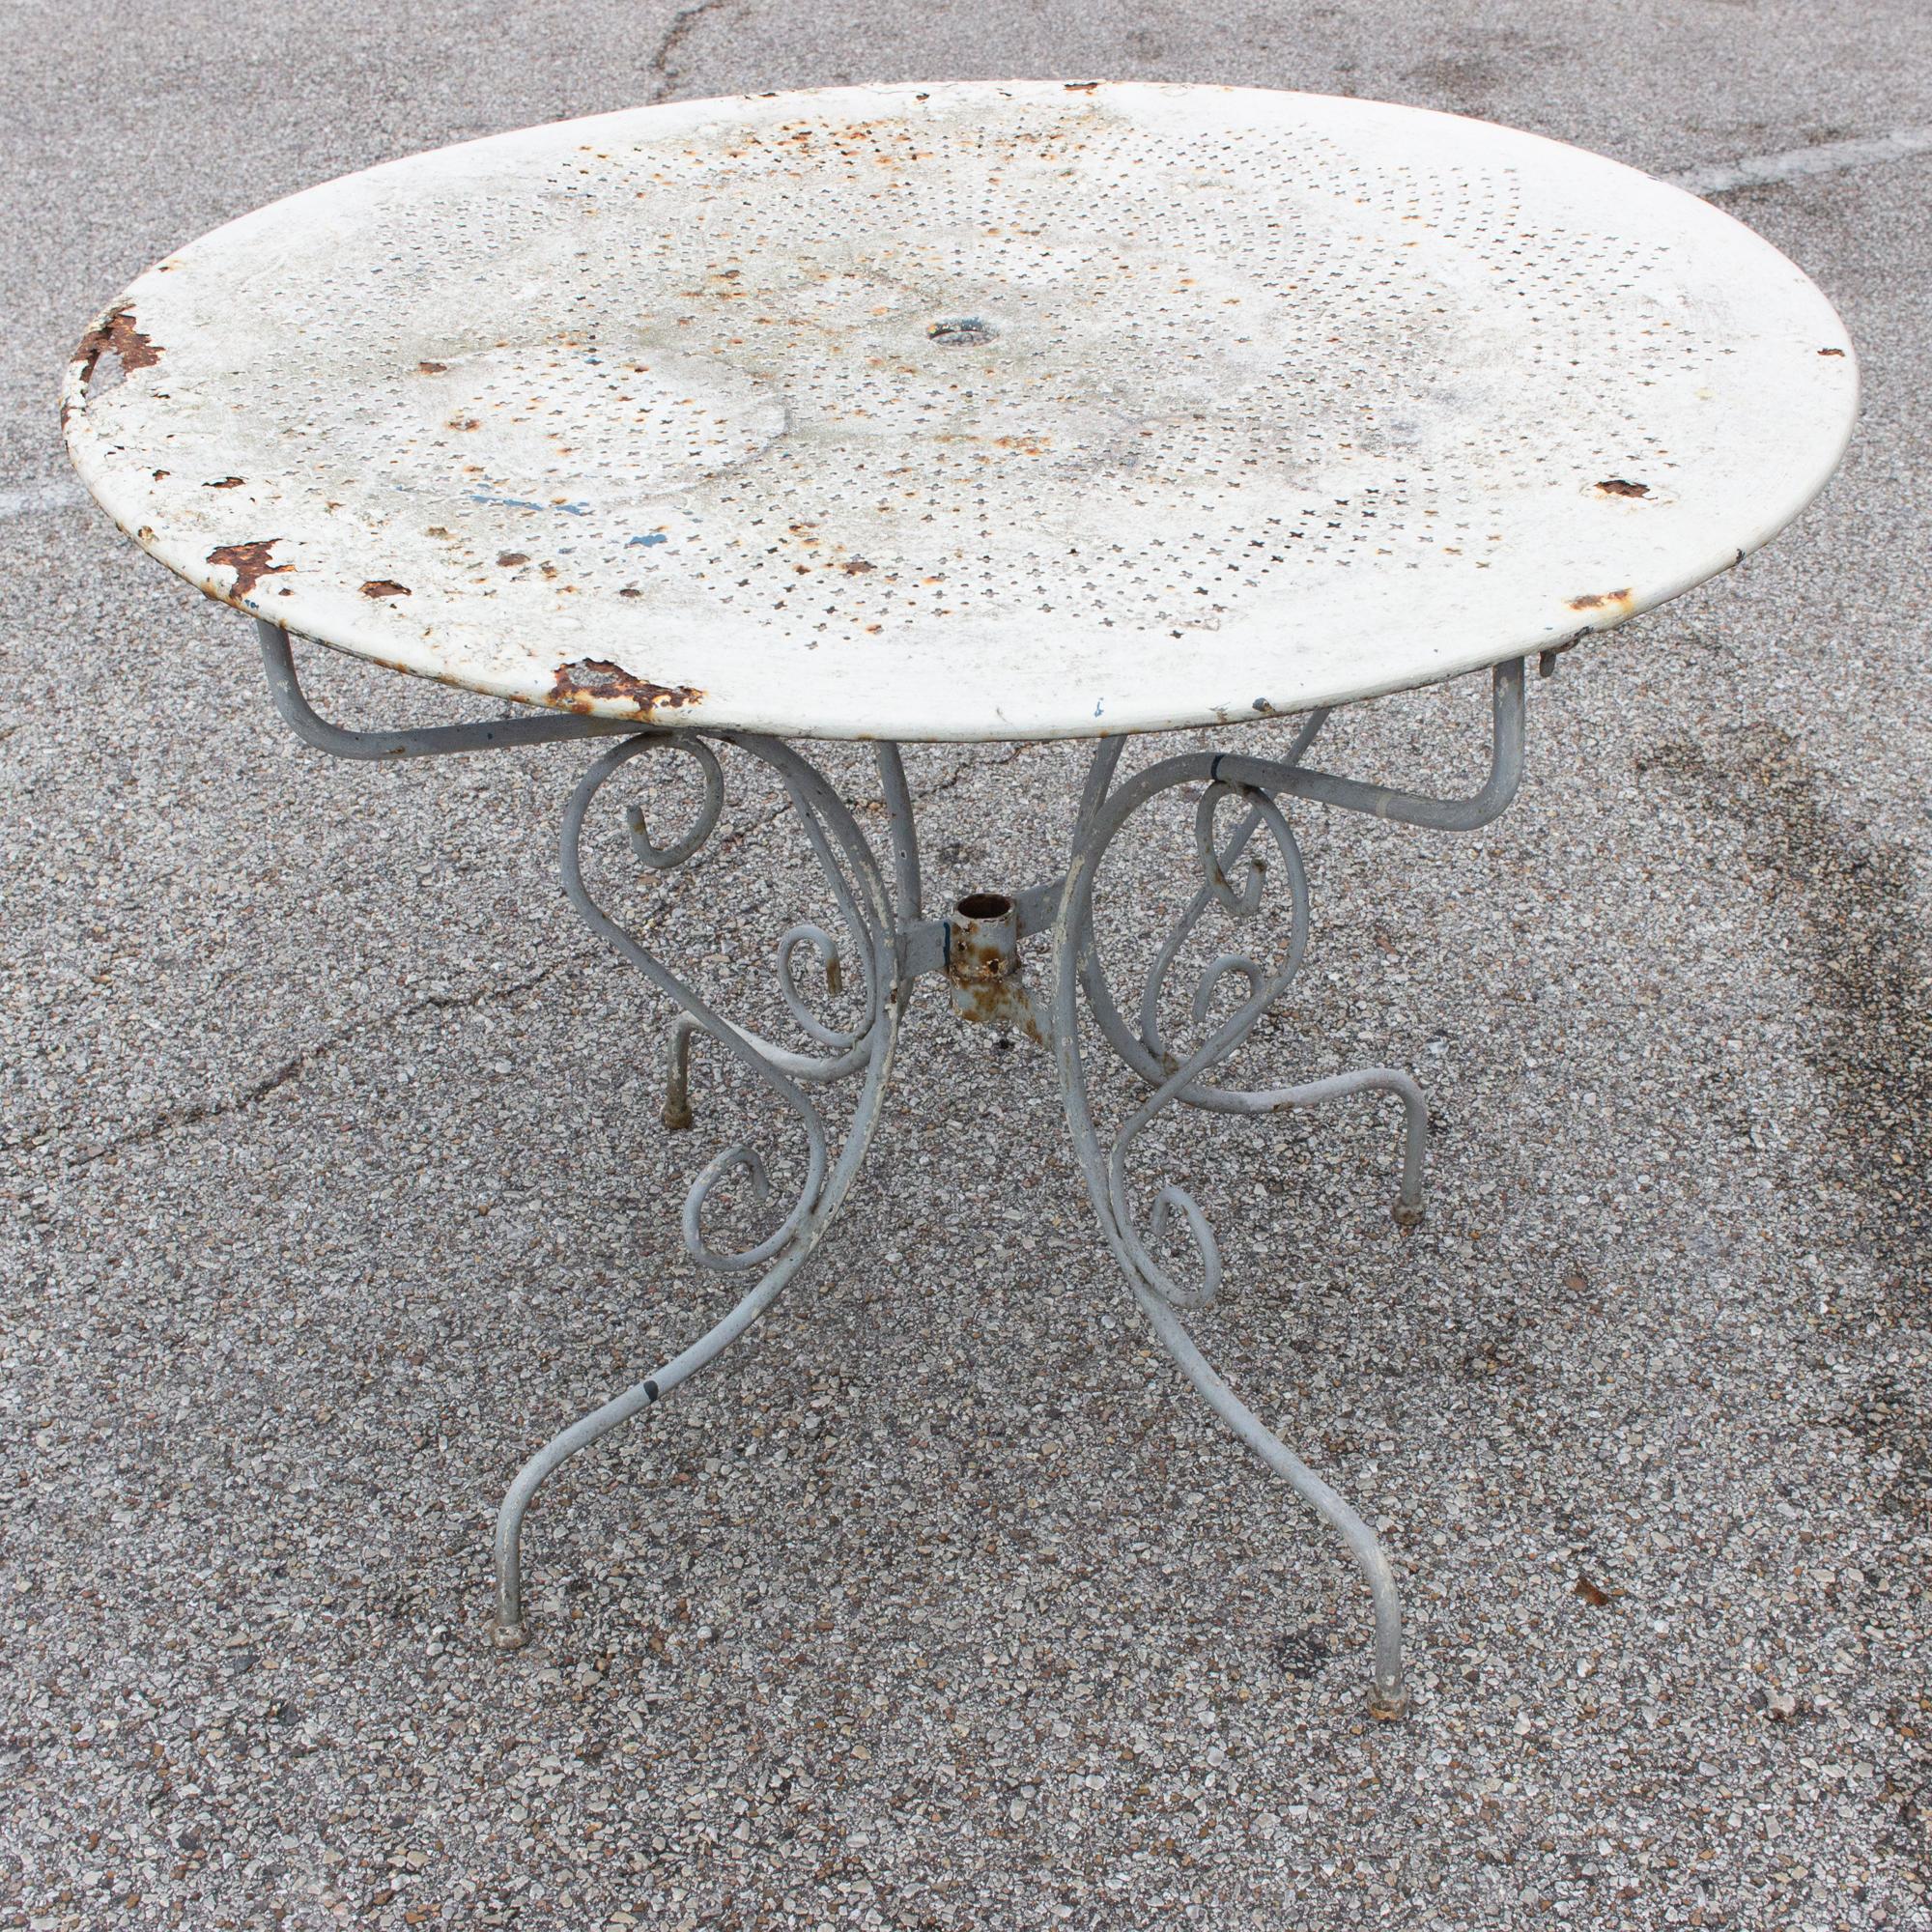 1930s French Painted Metal Garden Table with Pierced Top 2